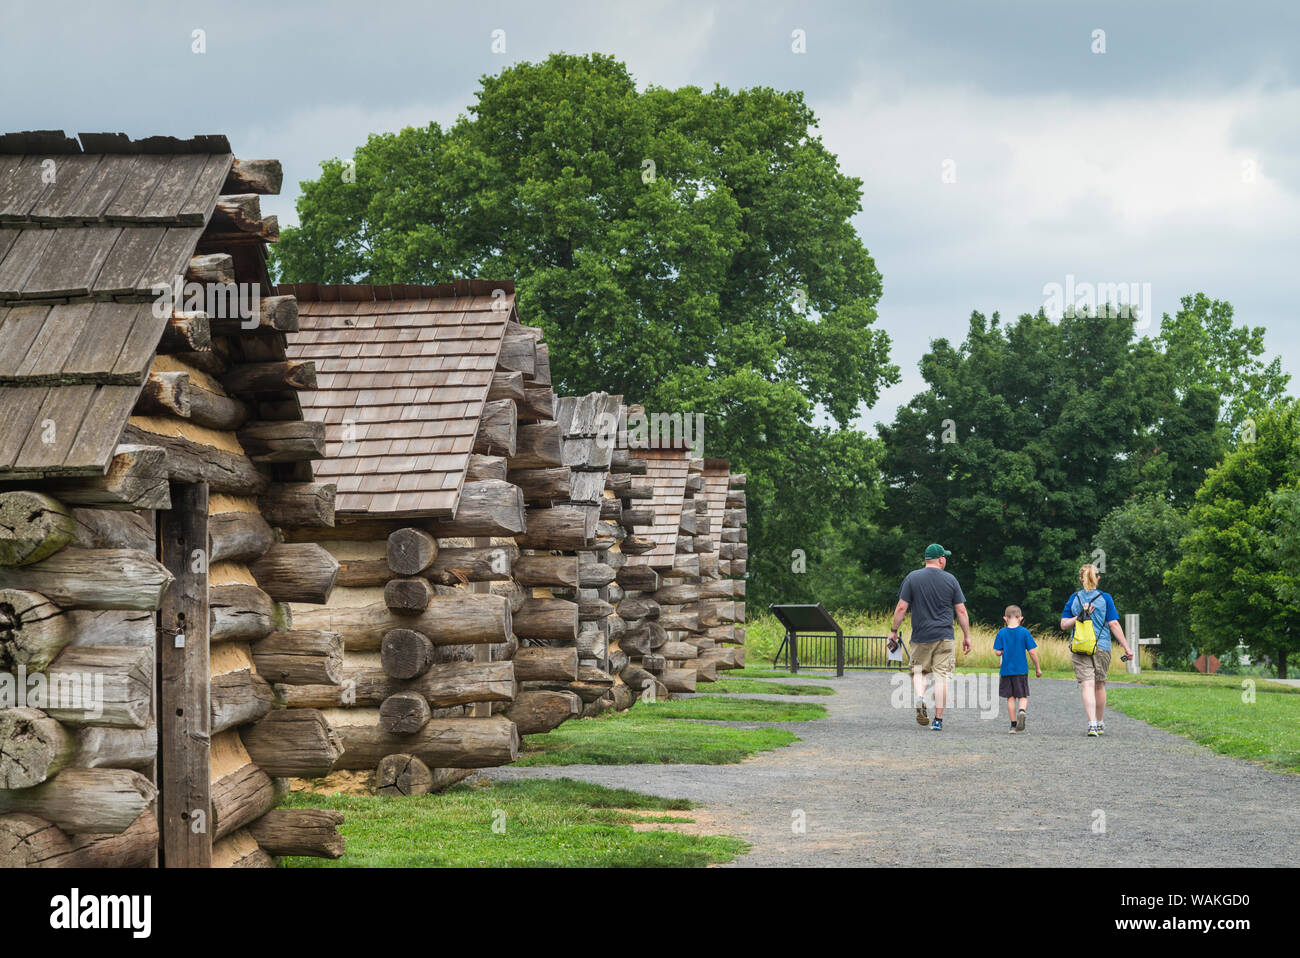 USA, Pennsylvania, King of Prussia. Valley Forge National Historical Park, battlefield of the American Revolutionary War, Muhlenberg Brigade wooden cabins Stock Photo